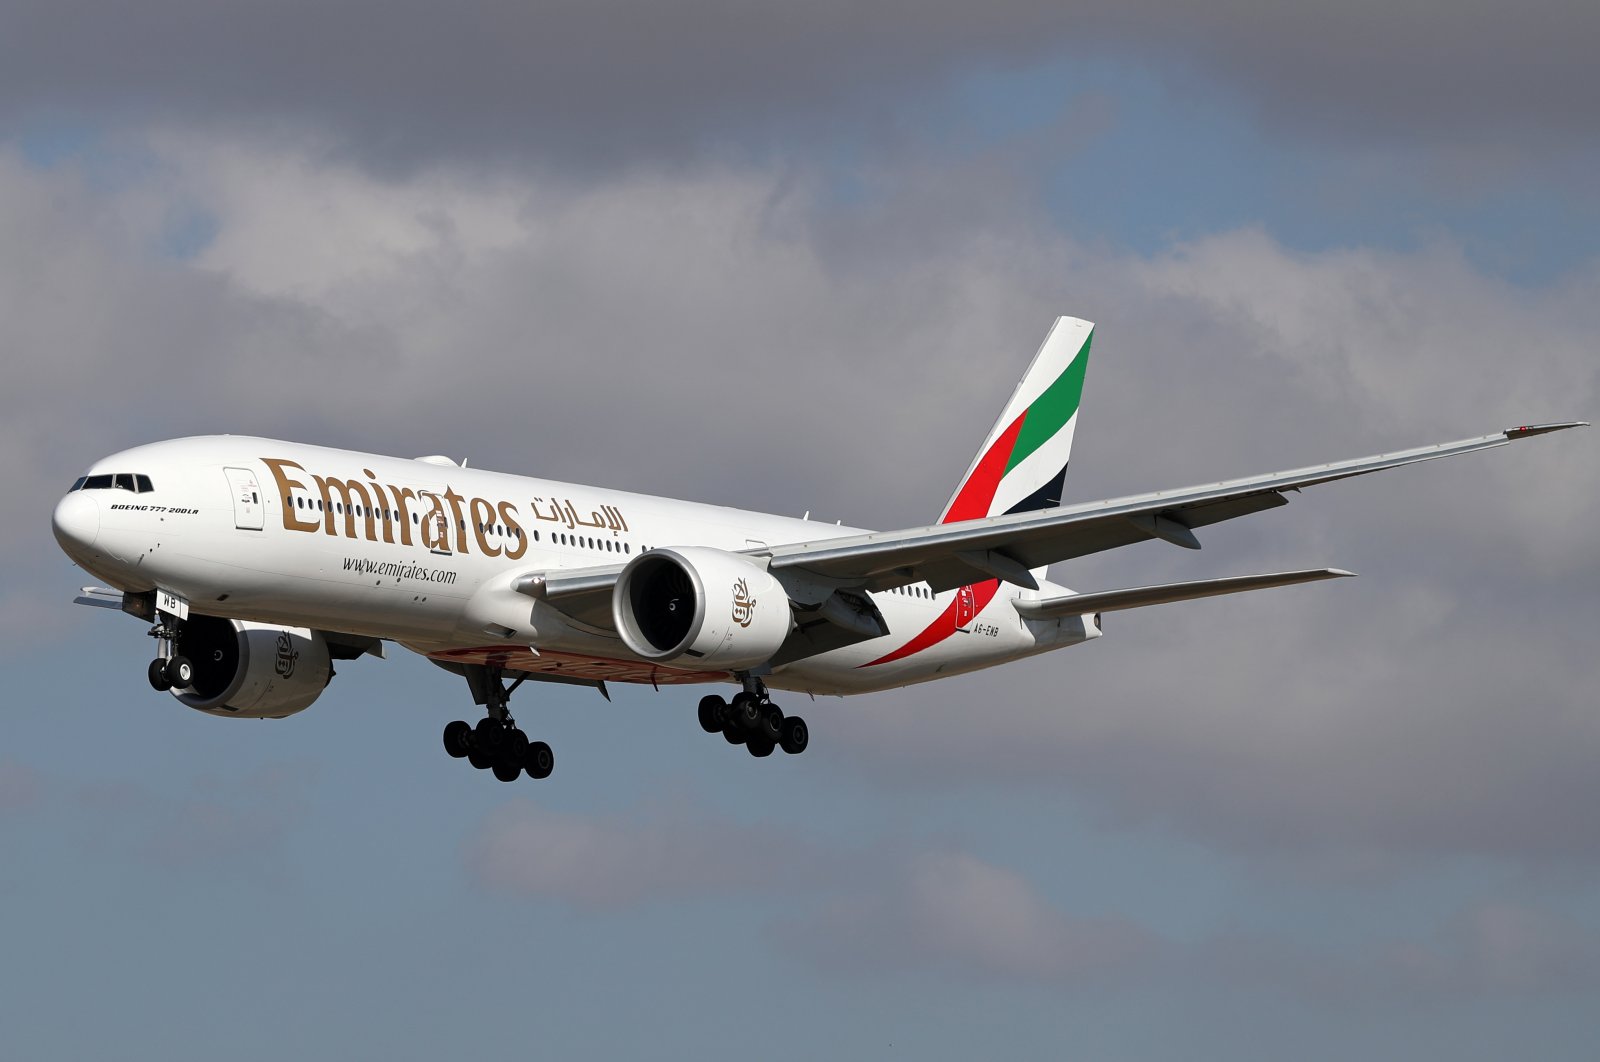 A Boeing 777-21H(LR) of Emirates airlines comes in for a landing at Barcelona Airport, Barcelona, Spain, Feb. 10, 2022. (Getty Images Photo)